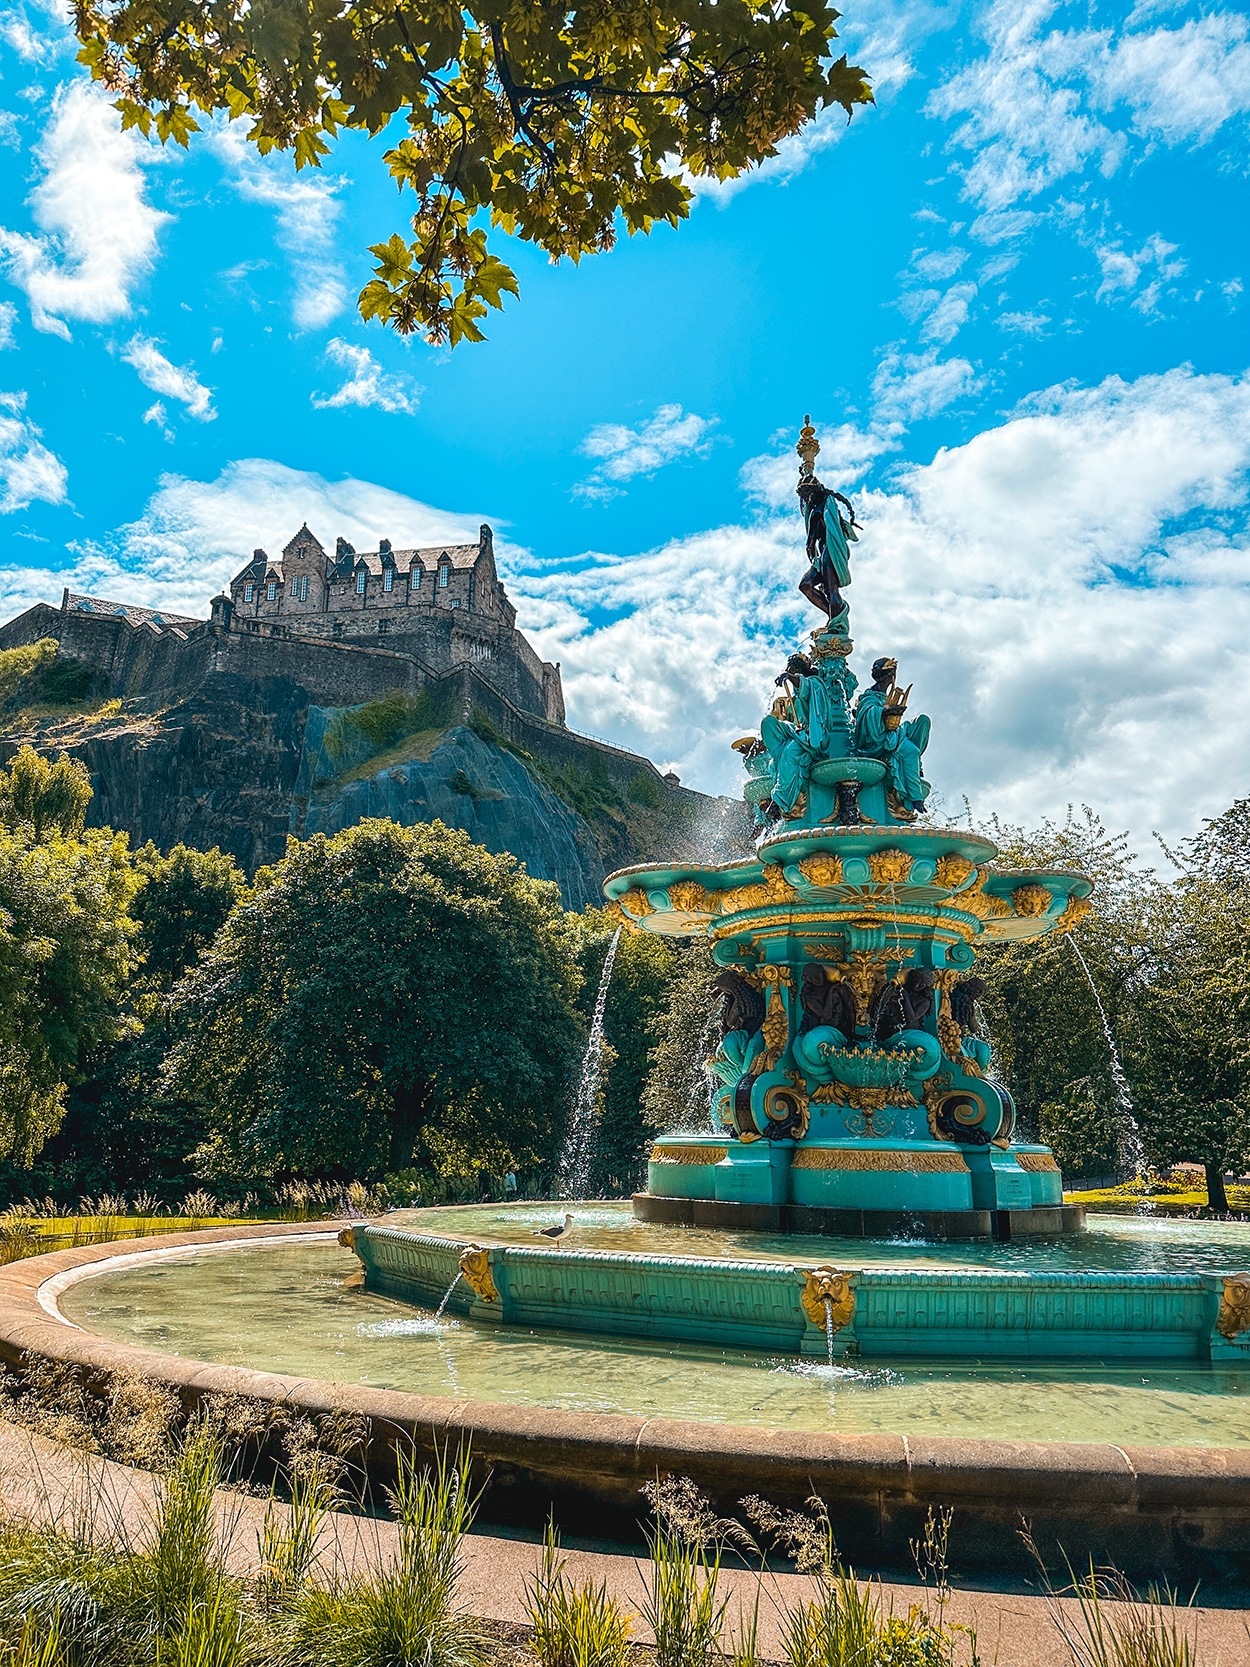 Ross Fountain in Princes Street Gardens with a view of Edinburgh Castle - photo by Keryn Means editor of Twist Travel Magazine